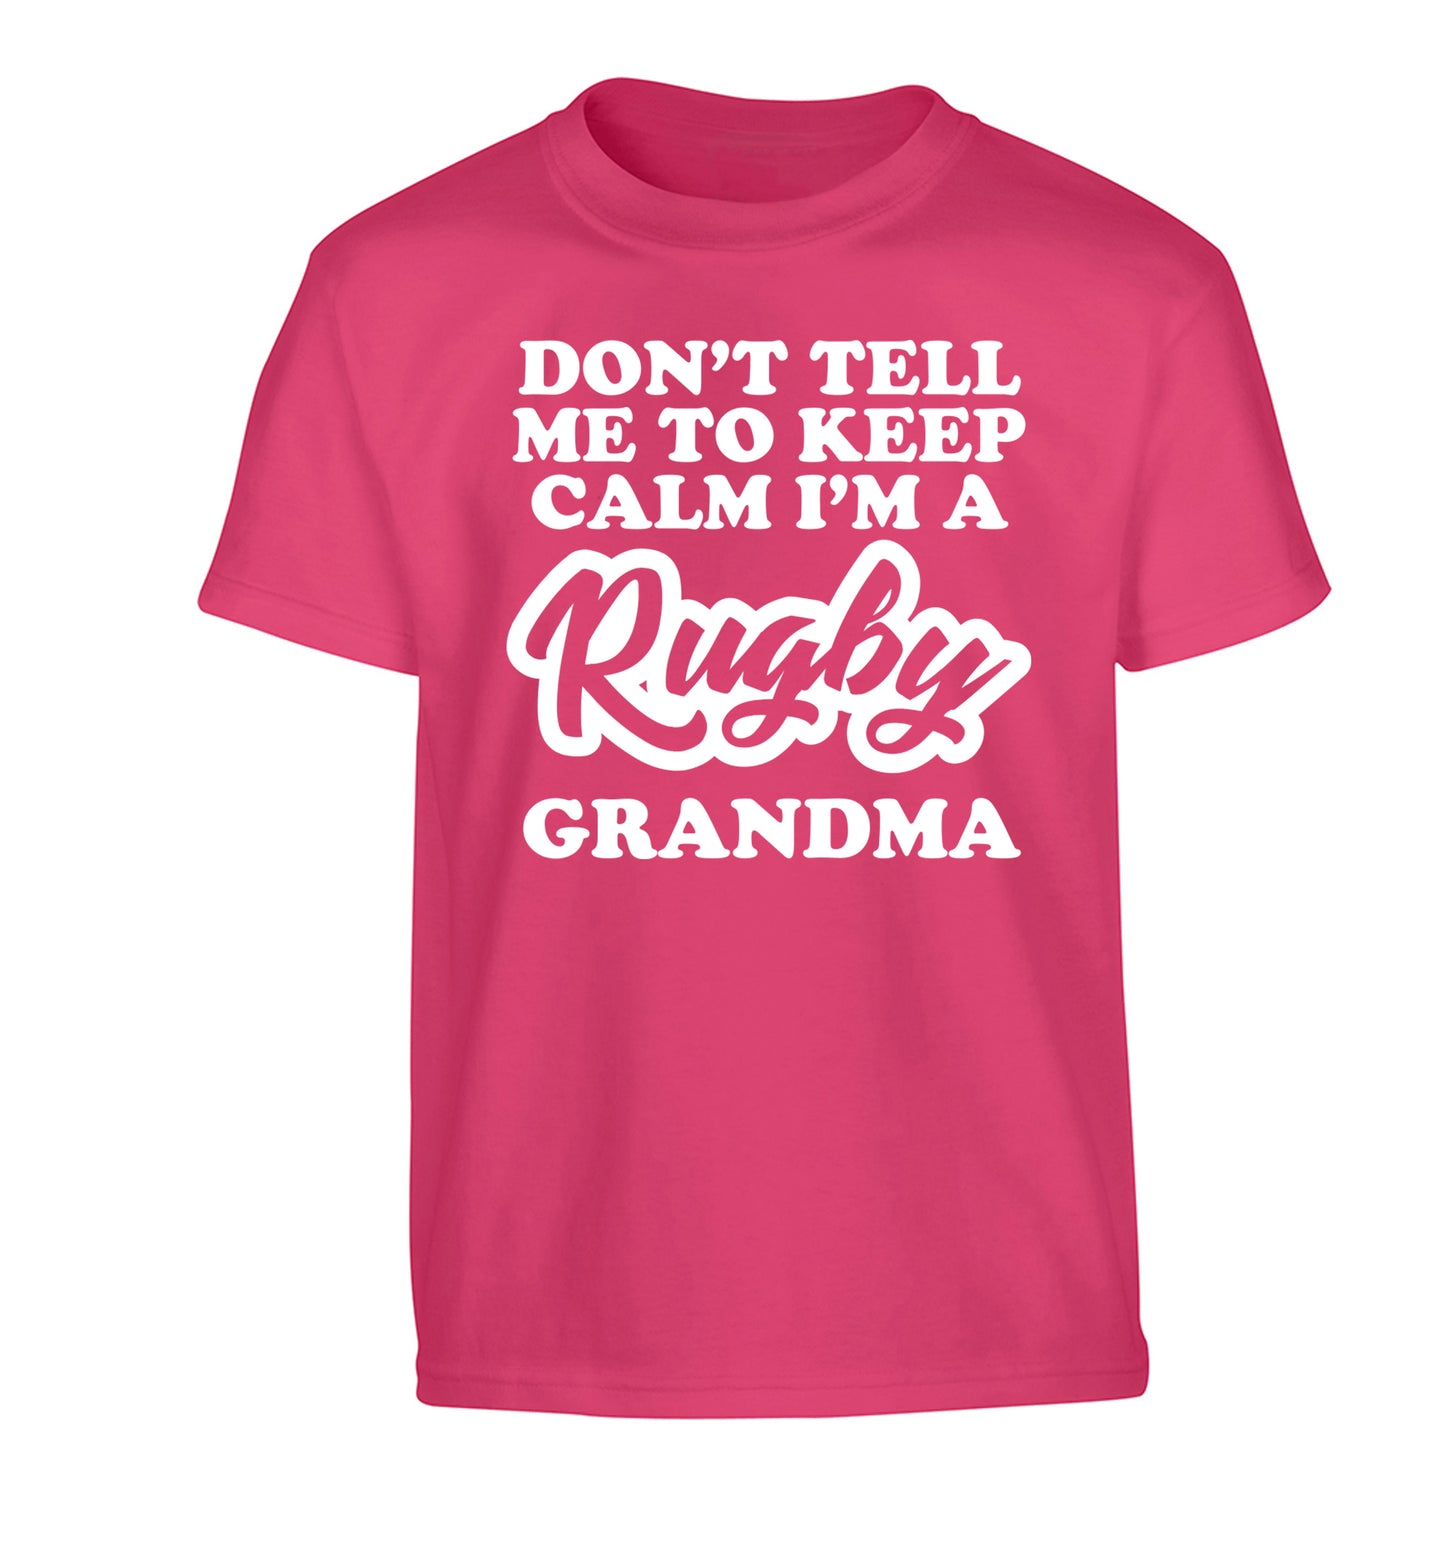 Don't tell me to keep calm I'm a rugby grandma Children's pink Tshirt 12-13 Years